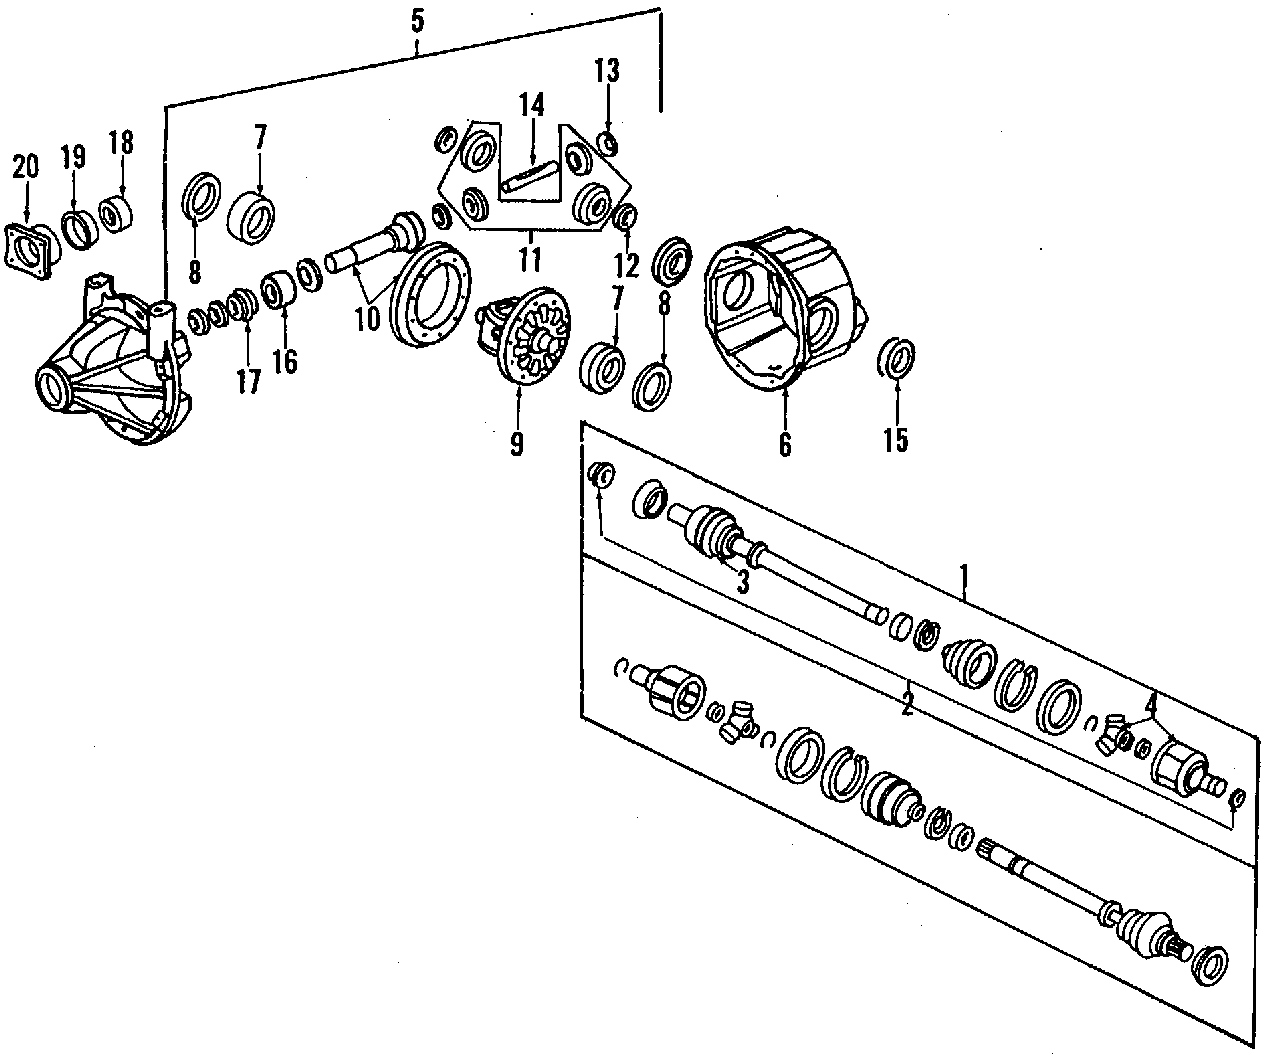 2REAR AXLE. AXLE SHAFTS & JOINTS. DIFFERENTIAL. PROPELLER SHAFT.https://images.simplepart.com/images/parts/motor/fullsize/F640360.png